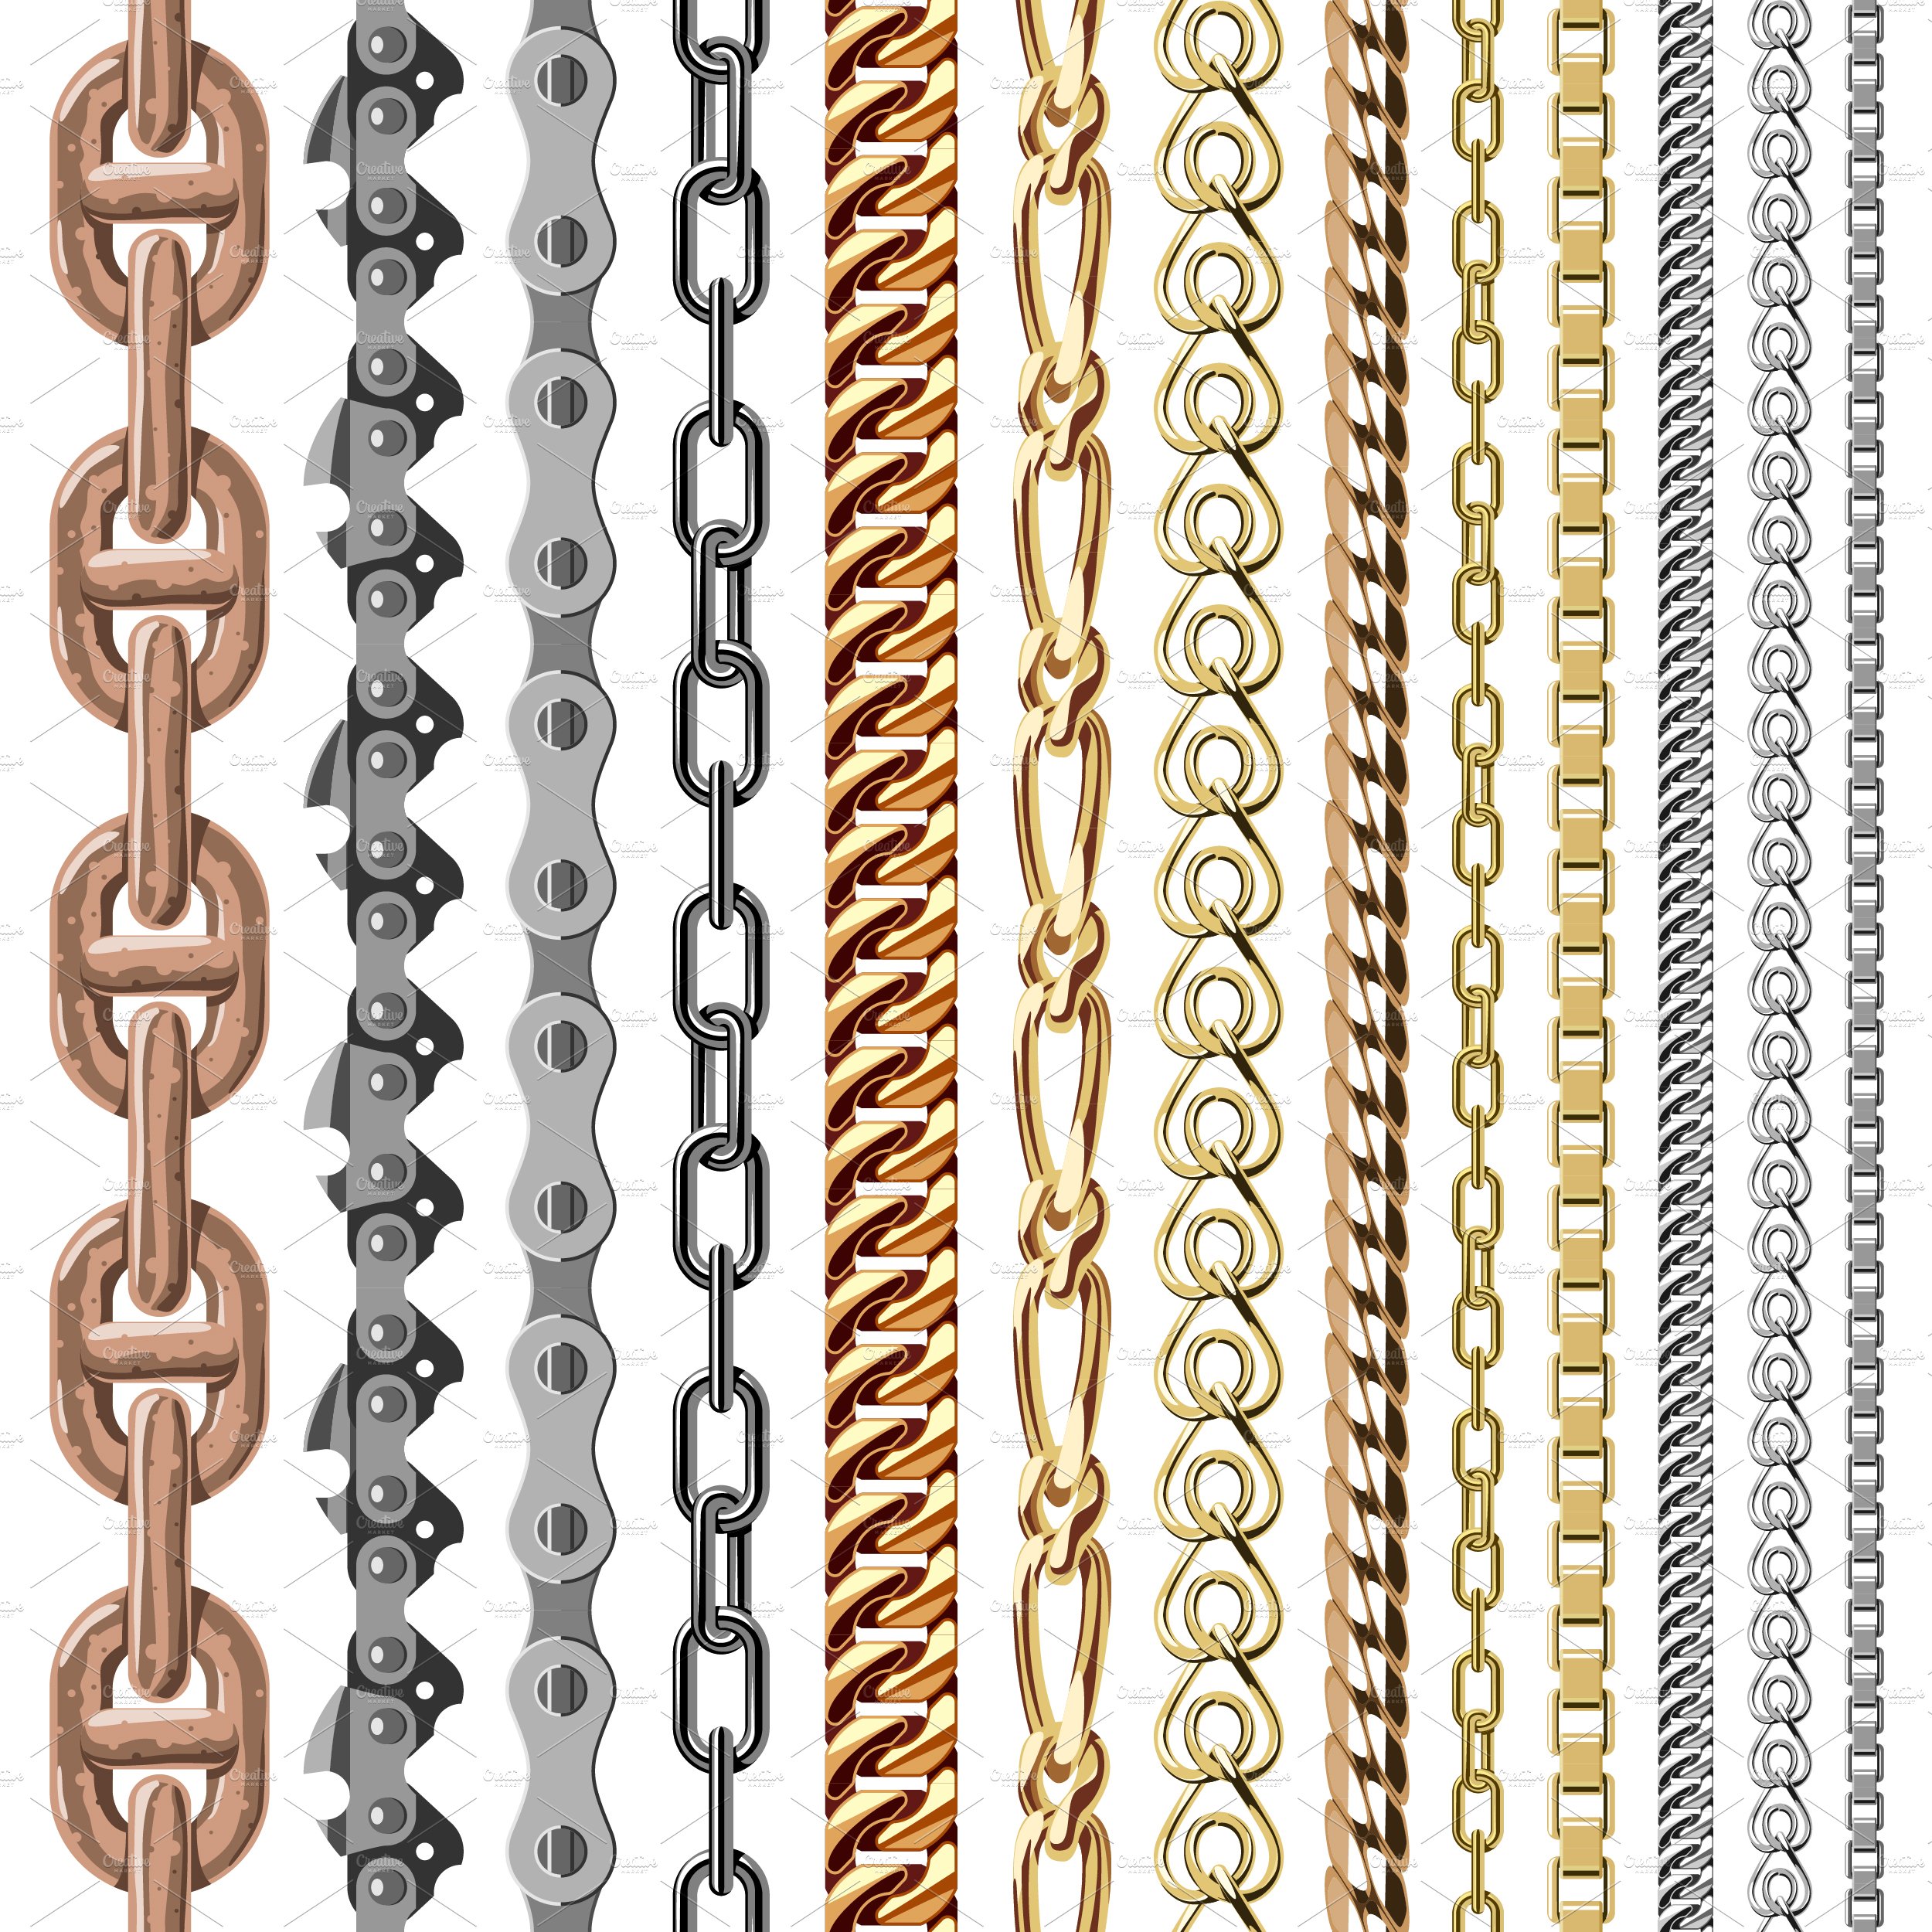 Chains link vector seamless cover image.